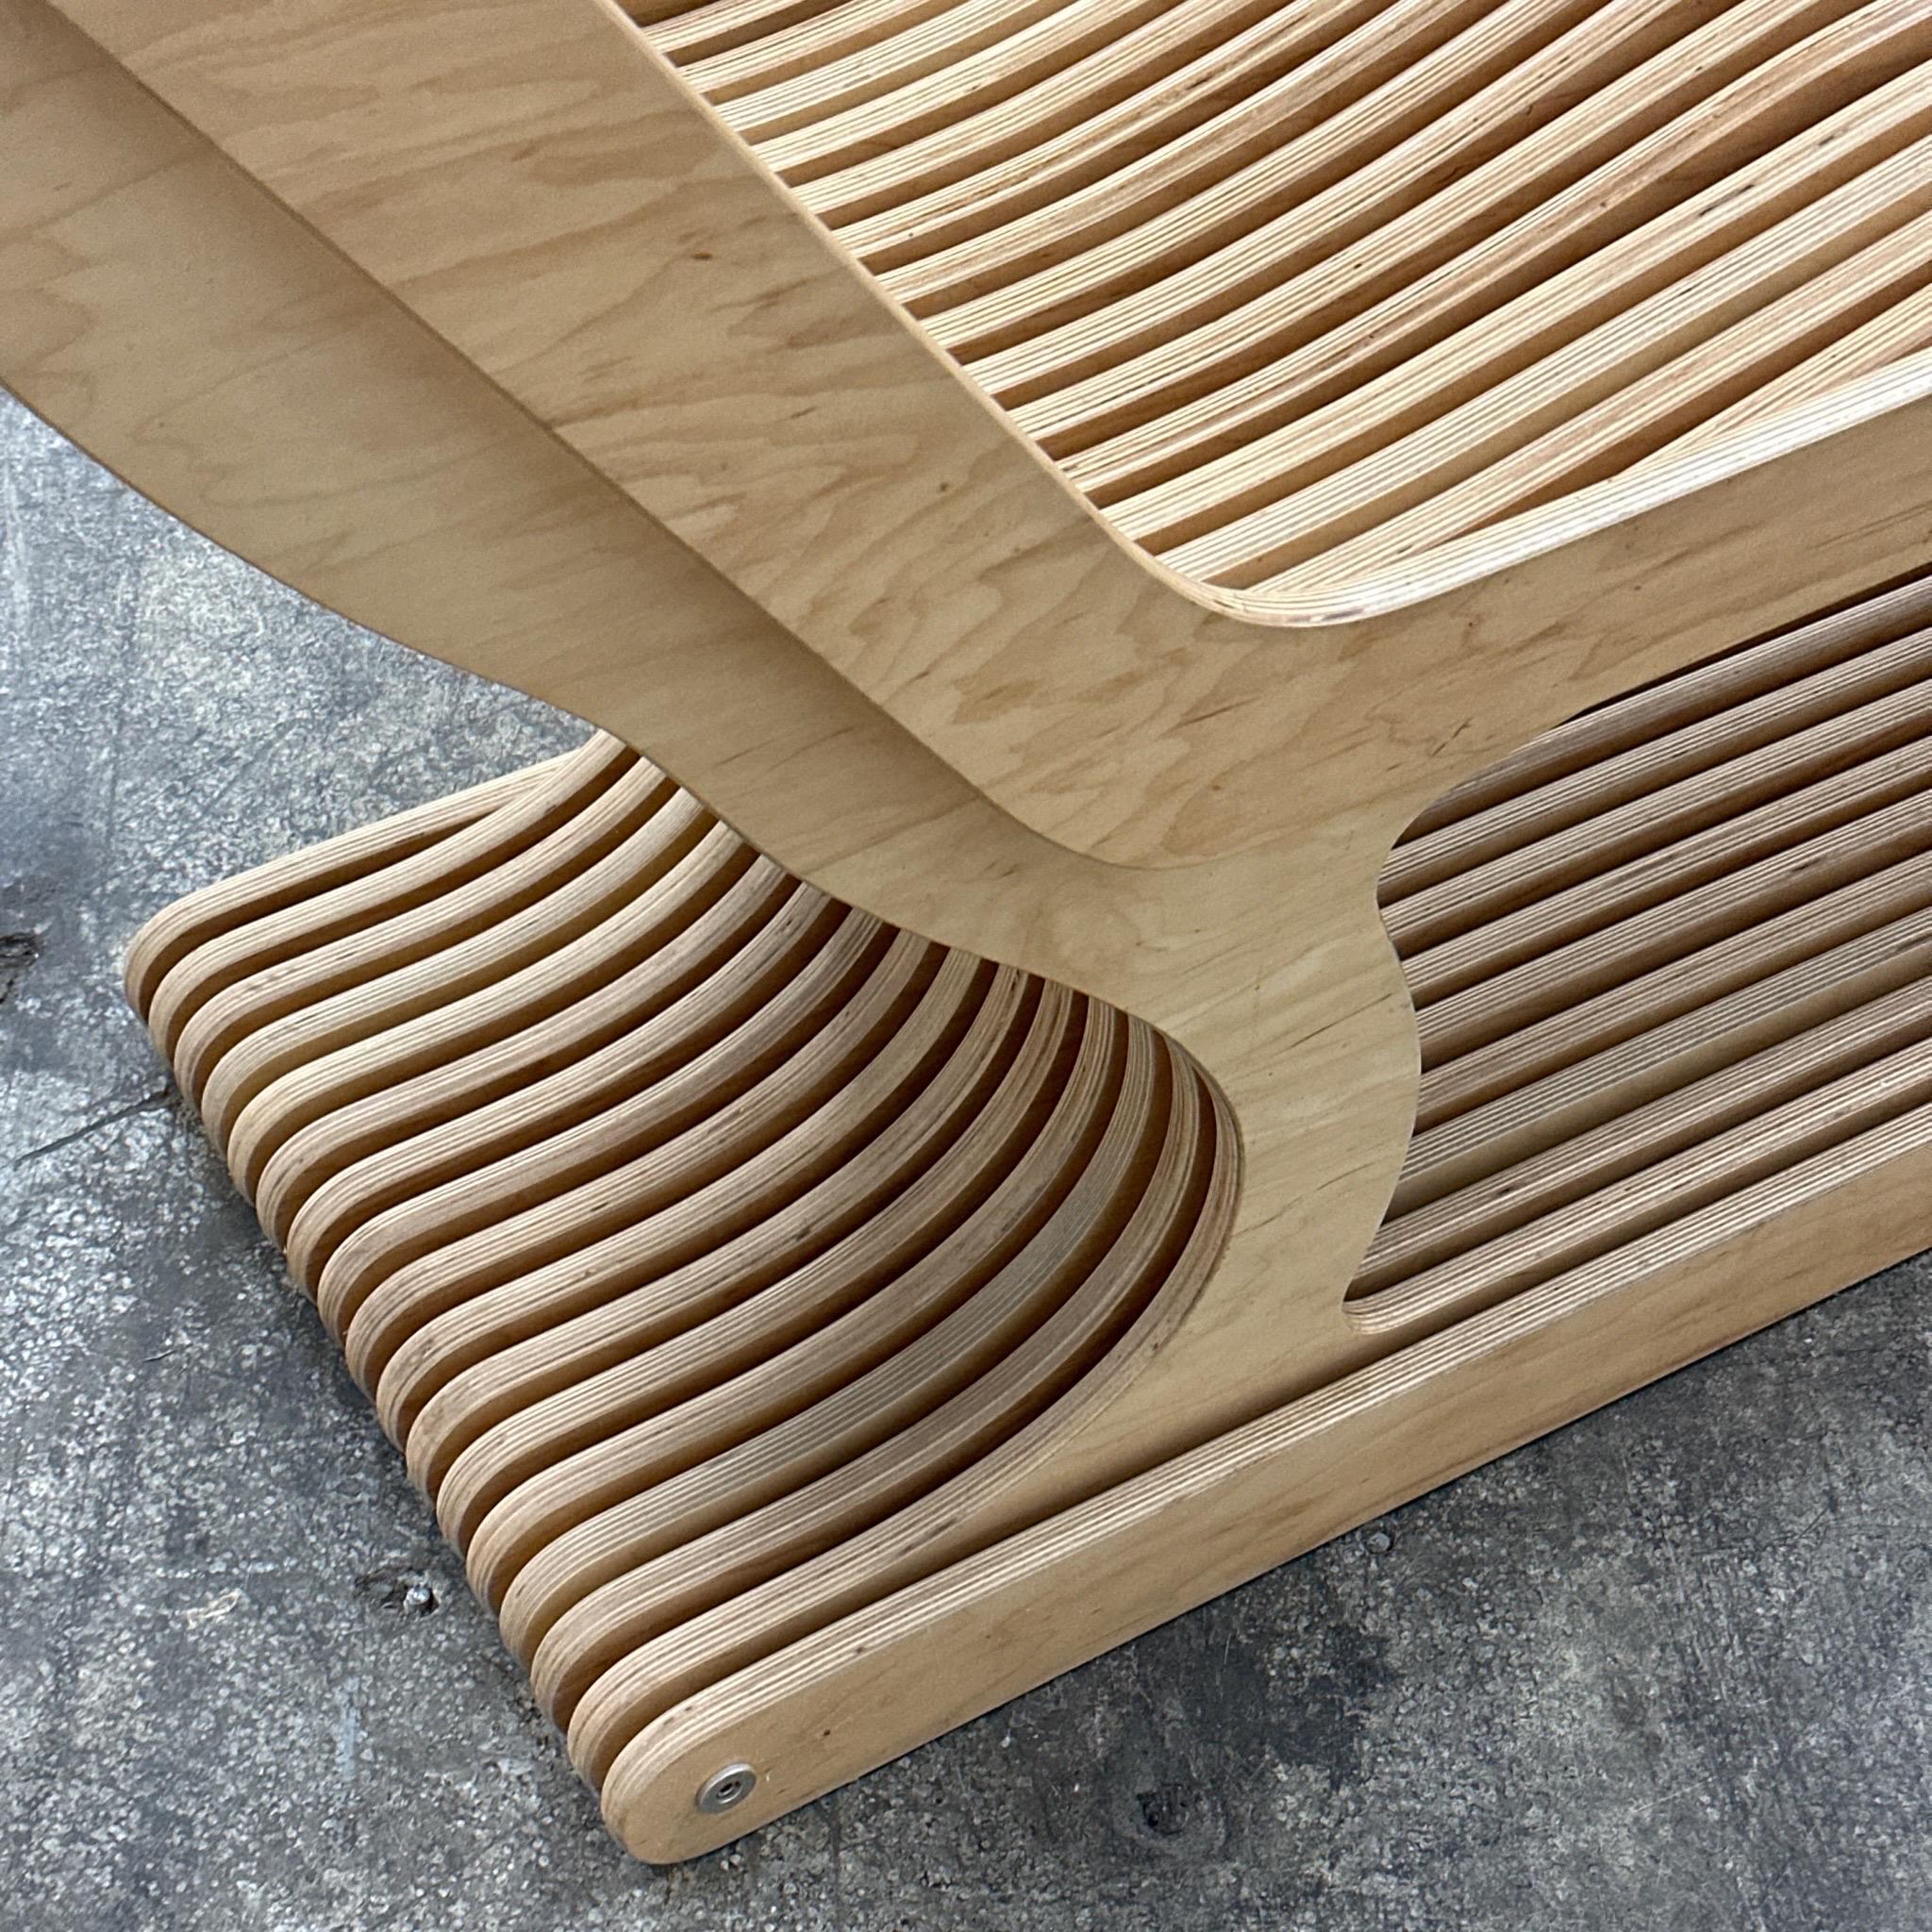 Plywood Studio Made Biomorphic Slat Chaise For Sale